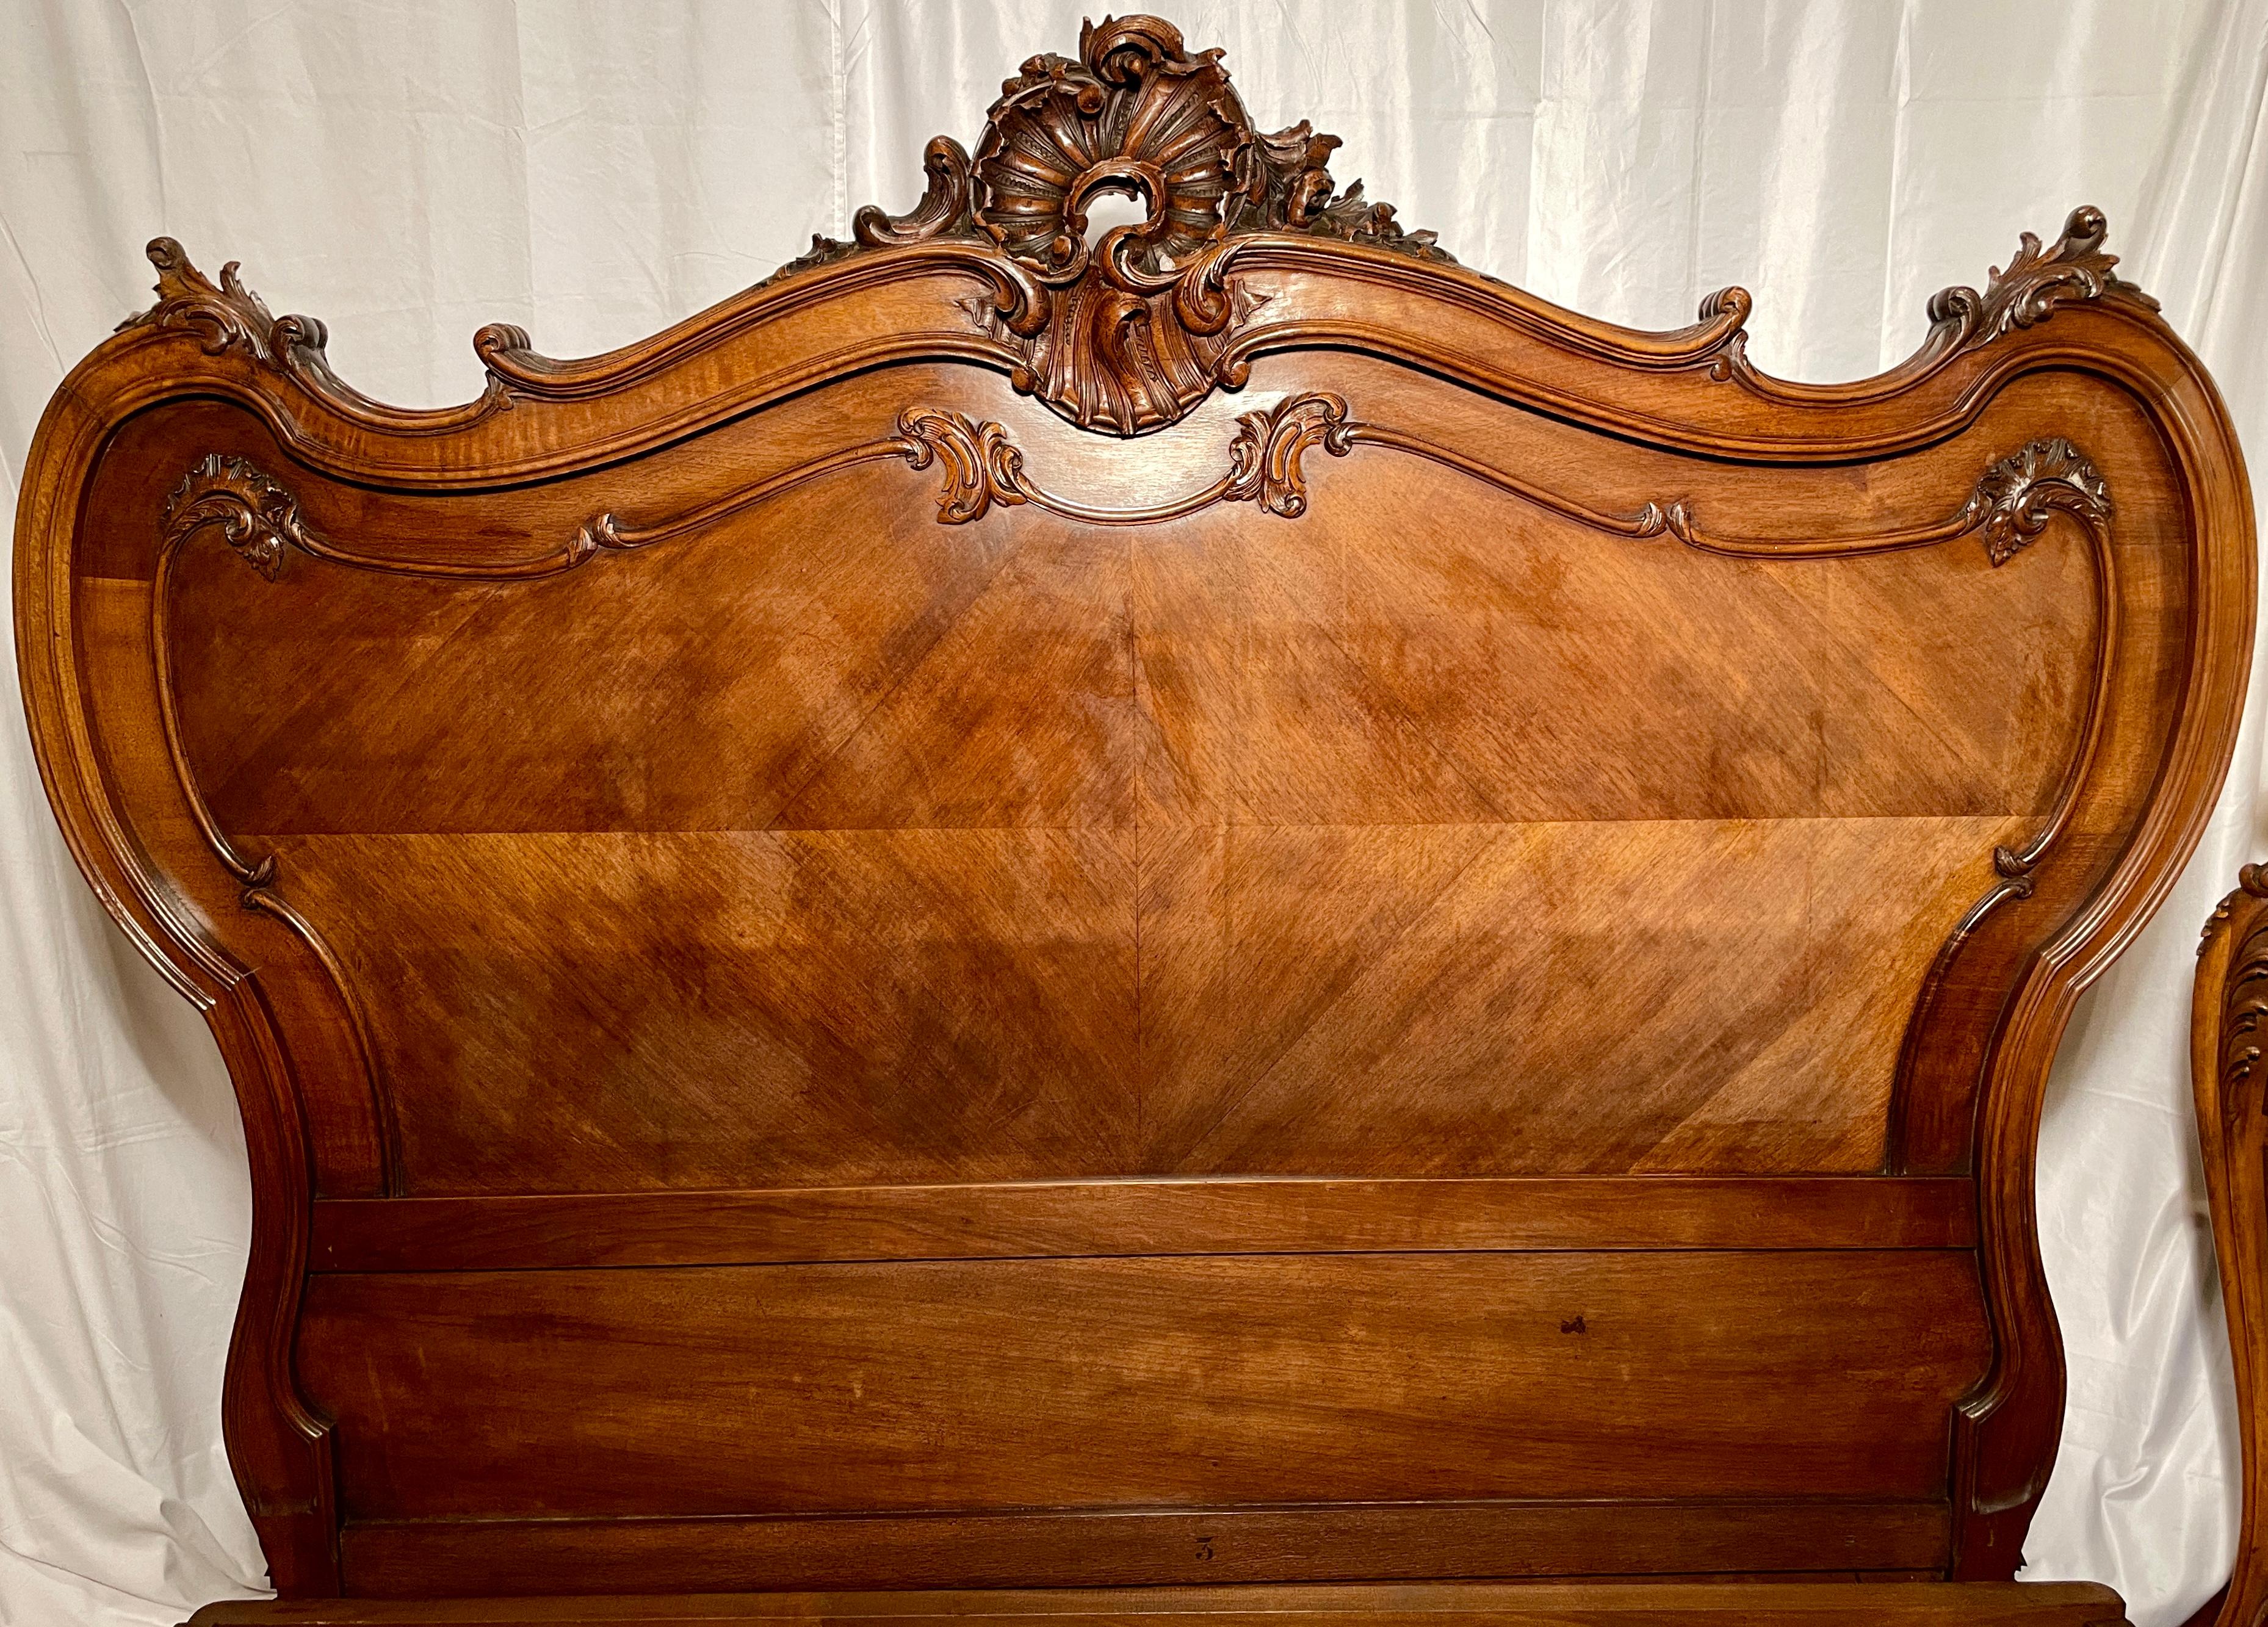 Queen size masterfully carved antique French walnut bed and night table, circa 1875-1895. 

Dimensions: 
Exterior- 62 inches high (headboard) x 68.5 inches wide x 89 inches long 
Interior: 59 inches wide x 80 inches long
Side table- 33 inches